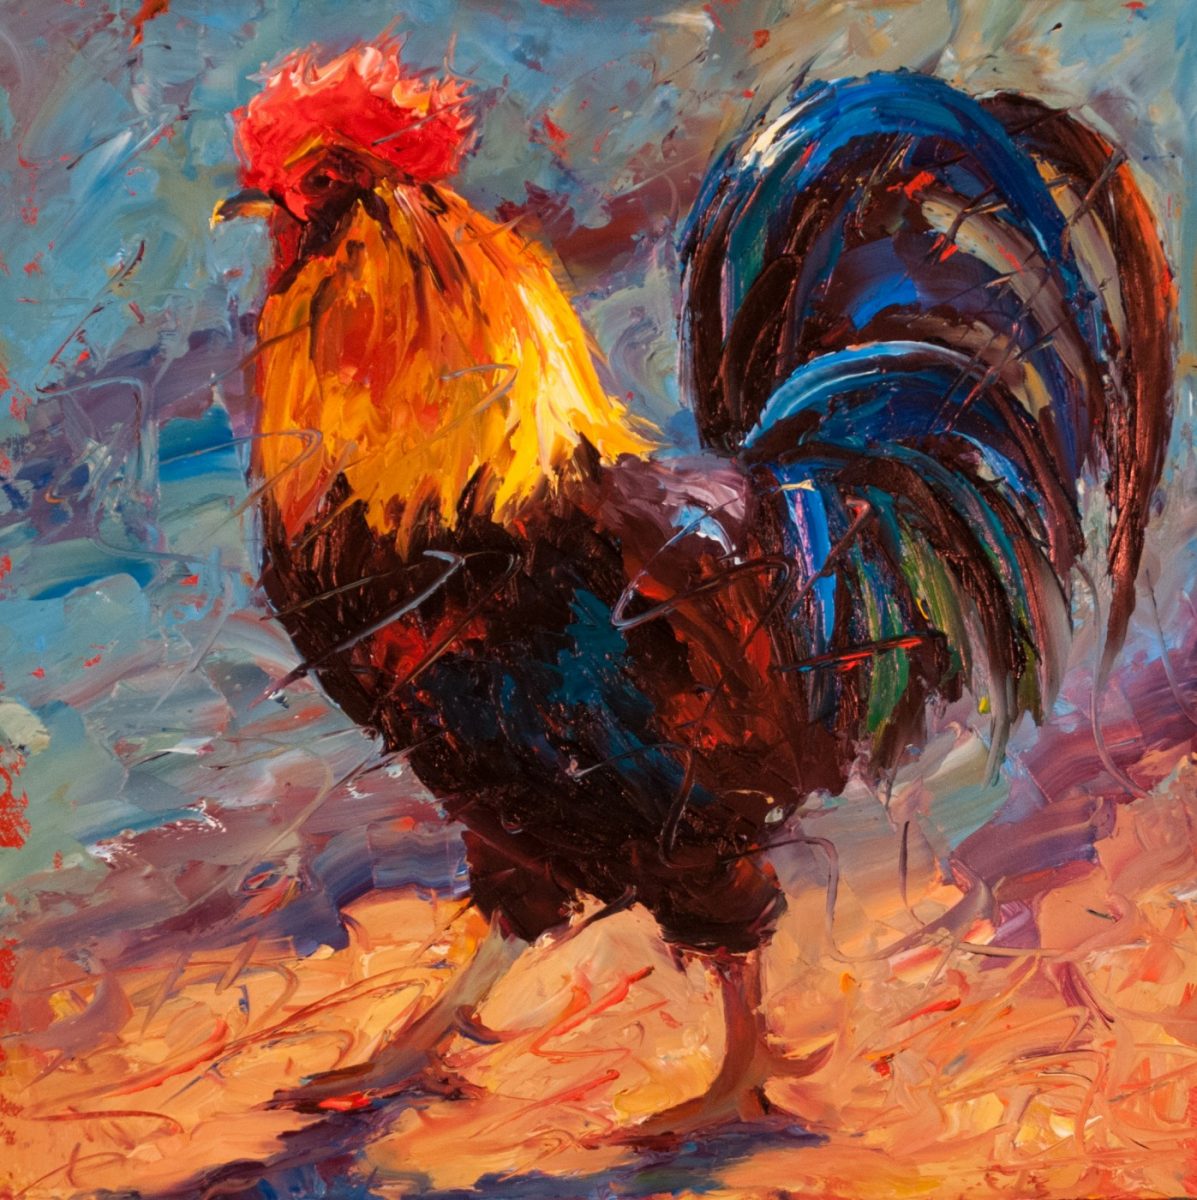 Walk on By painting of a rooster by Cheri Christensen